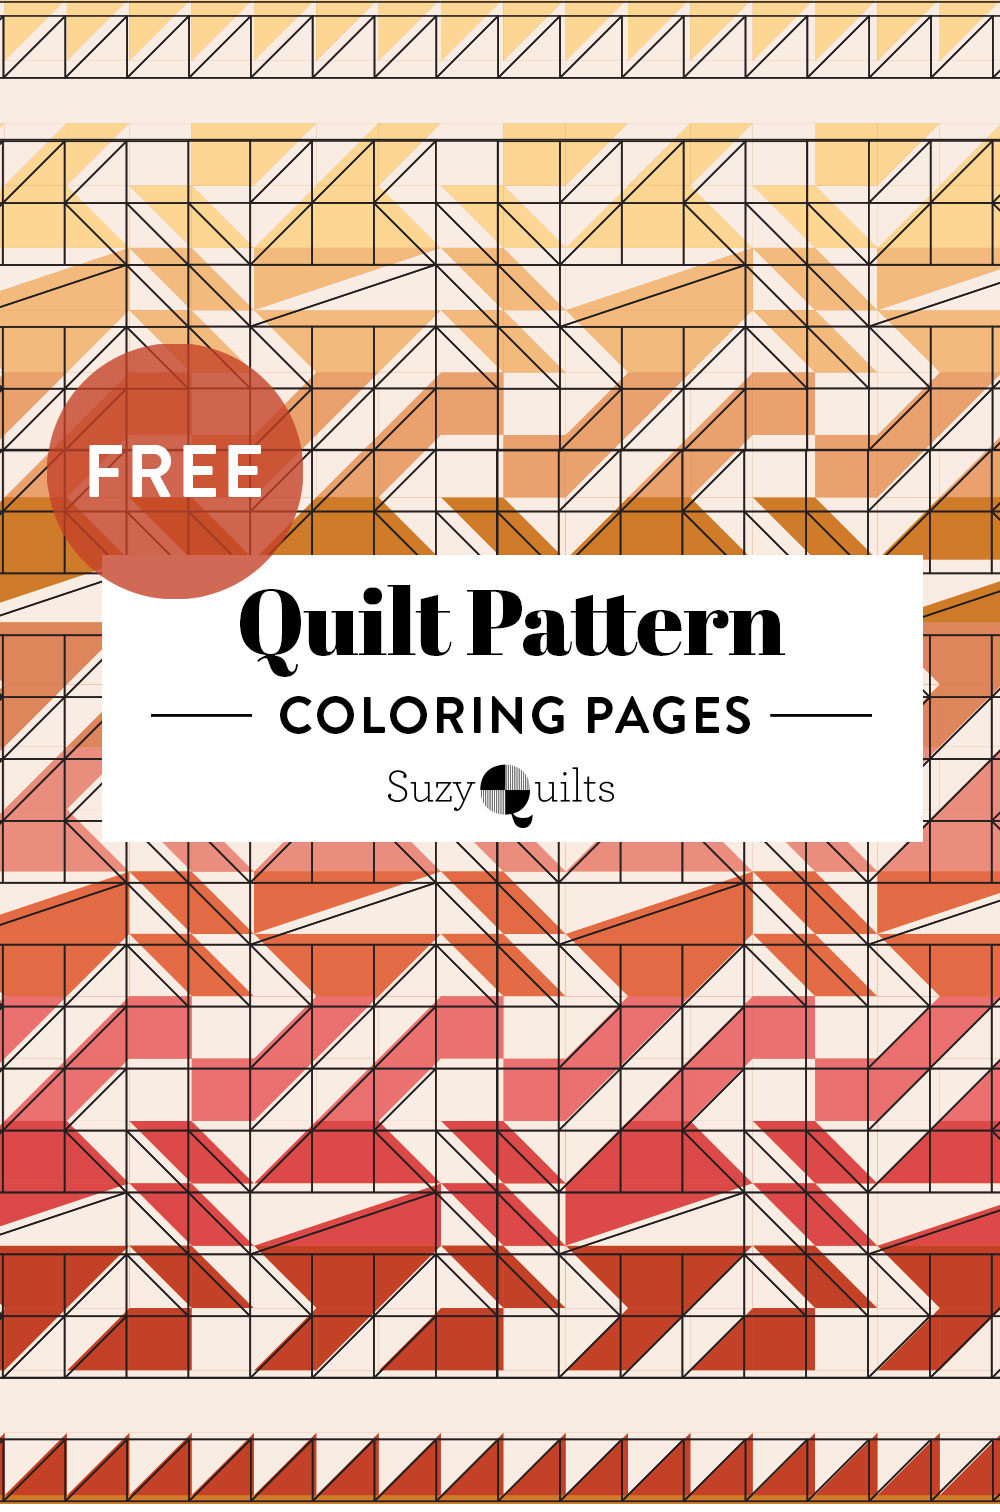 Get these free quilt pattern coloring pages by simply downloading the PDF and printing them on your home computer! Print and reprint for hours of coloring fun with kids or adults. suzyquilts.com #coloringsheets #freequiltpatterns